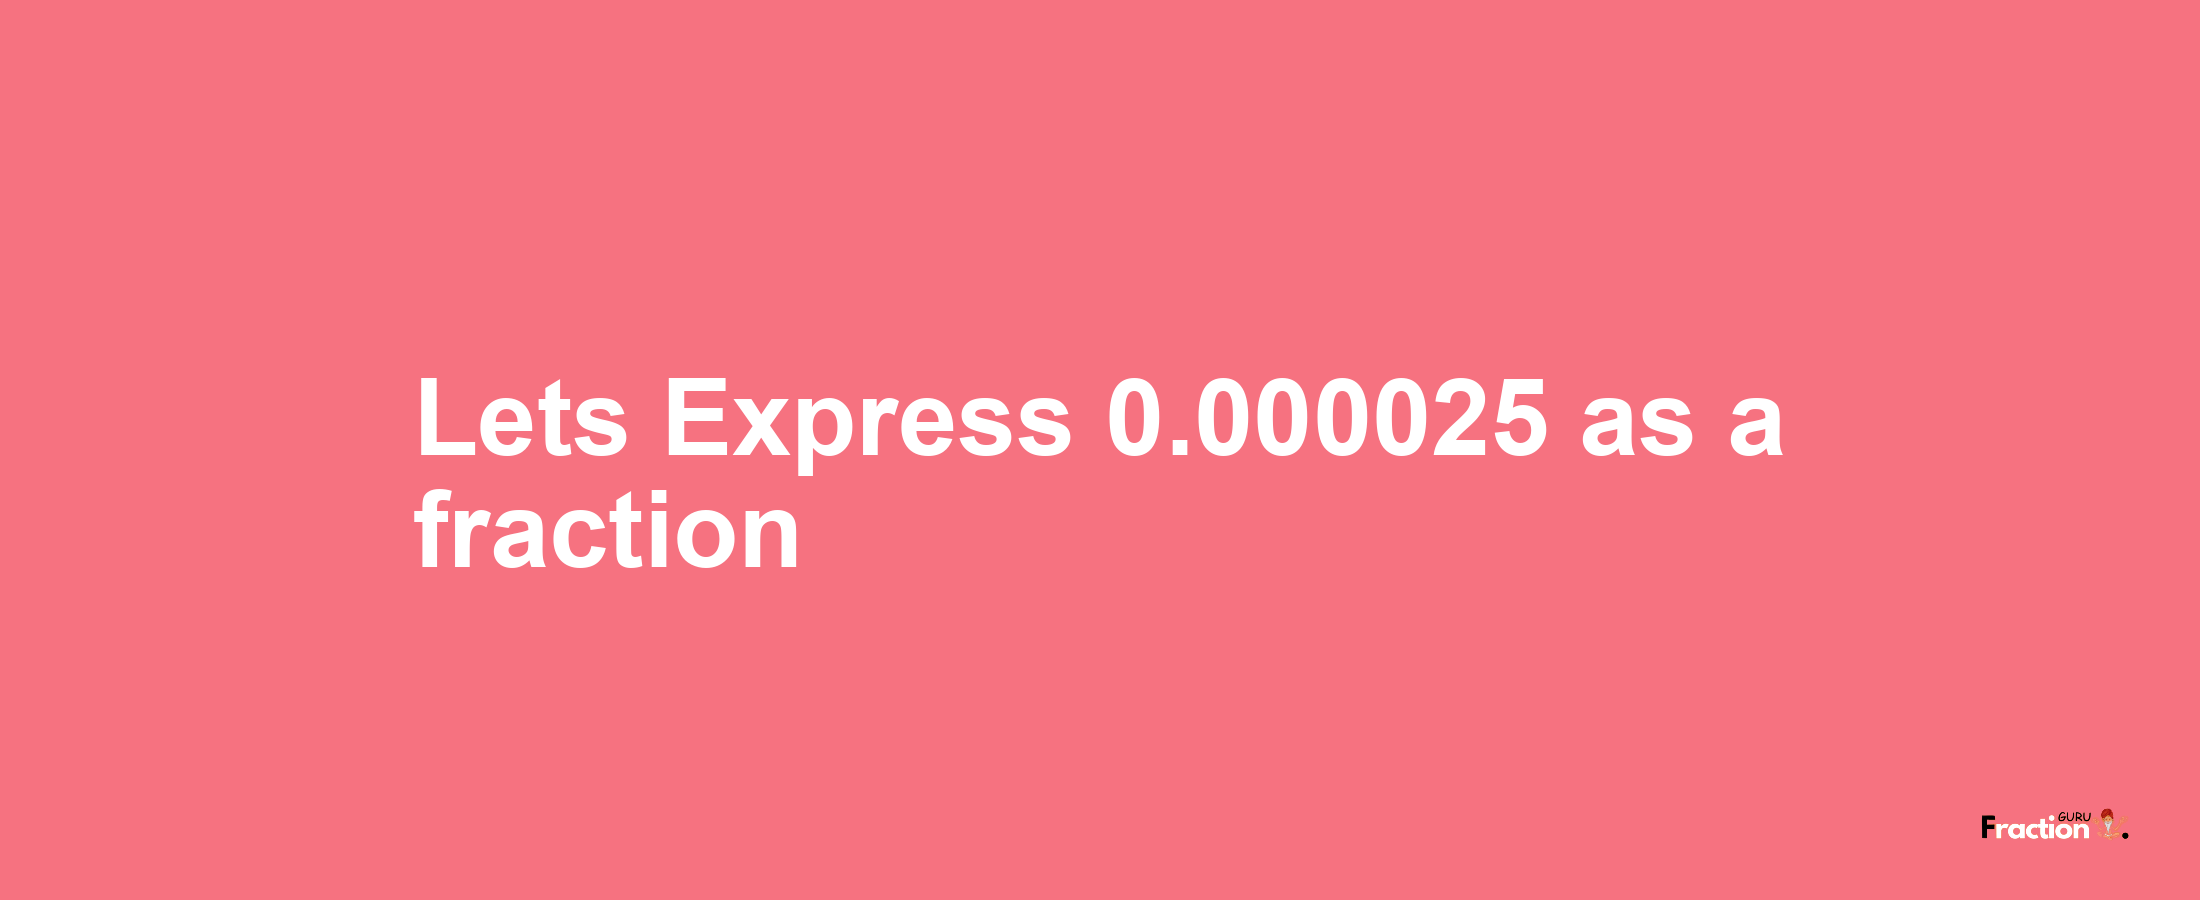 Lets Express 0.000025 as afraction